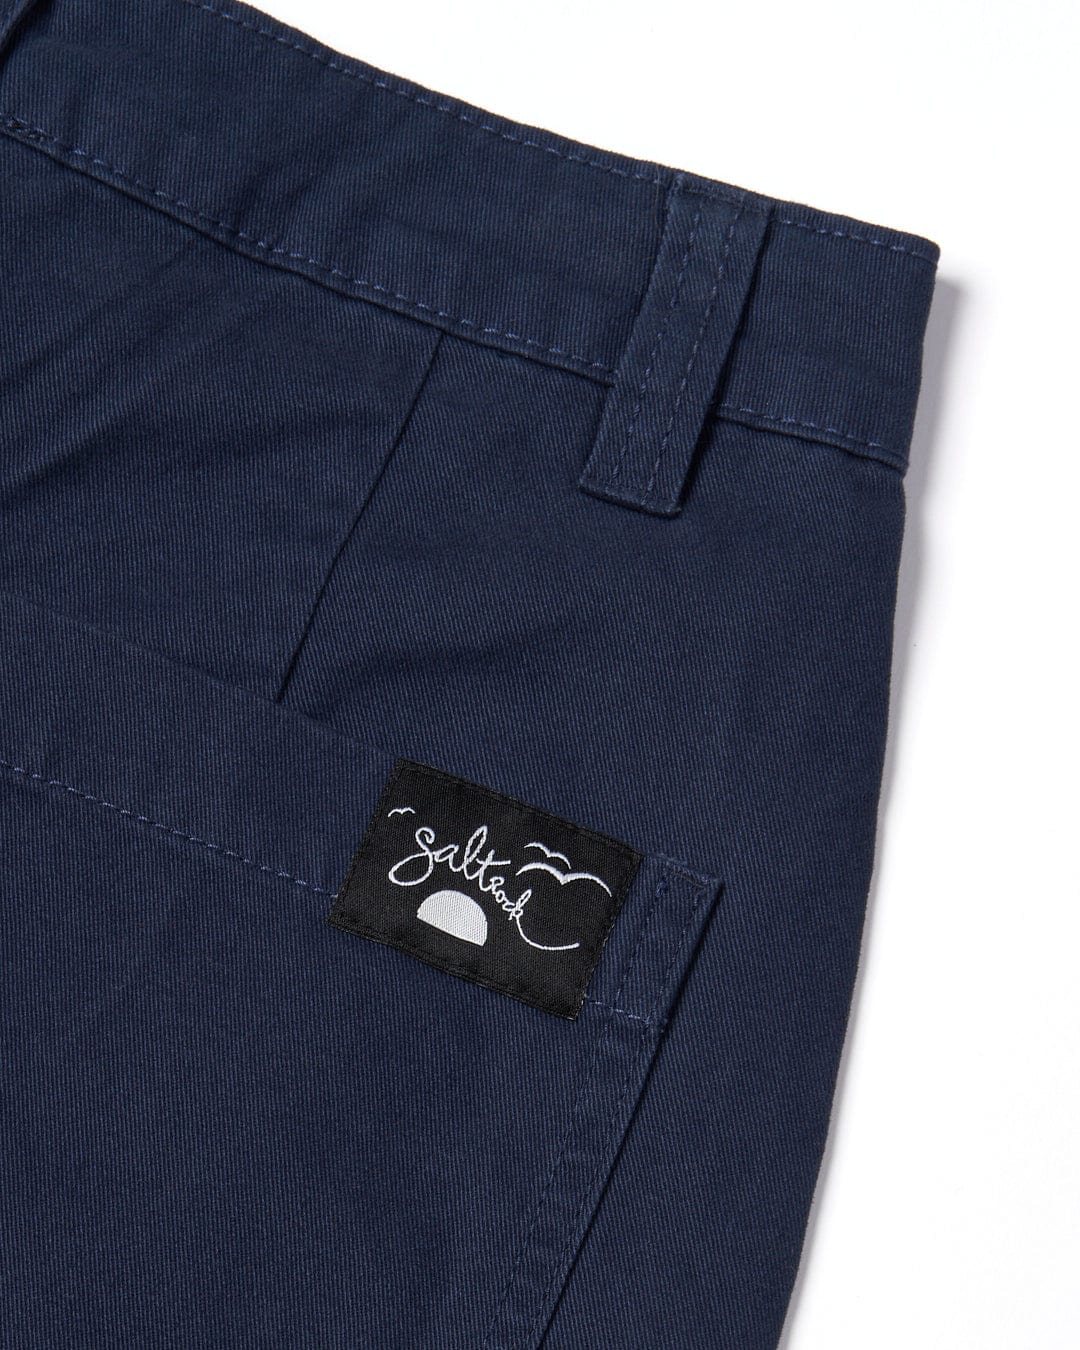 Navy blue Liesl chino shorts with a Saltrock branded label on the pocket.